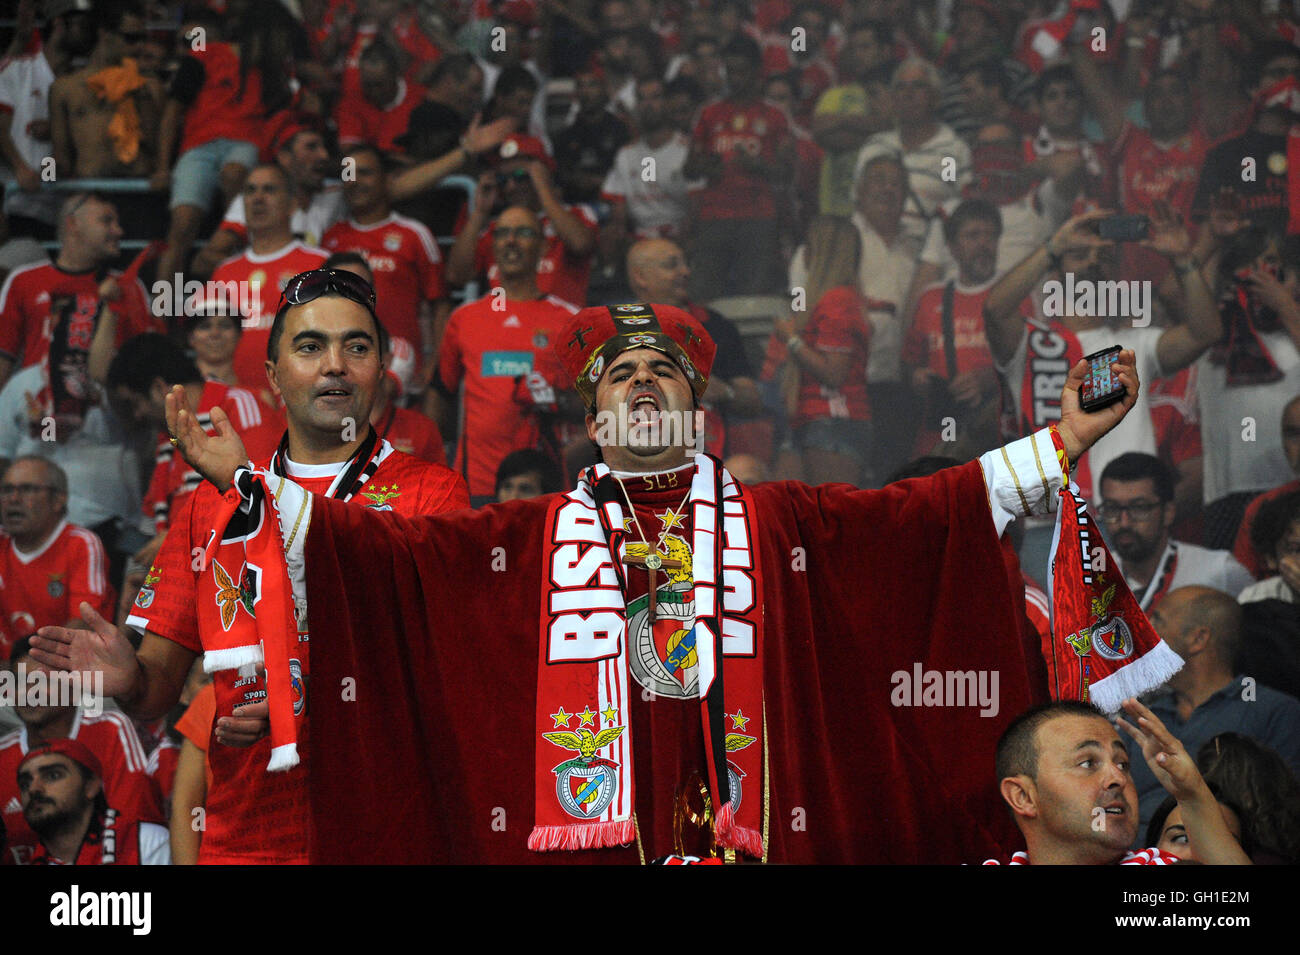 SL Benfica's fans celebrate their team's victory over SC Braga in the Supertaca Candido Oliveira football match in Aveiro, Portugal Stock Photo